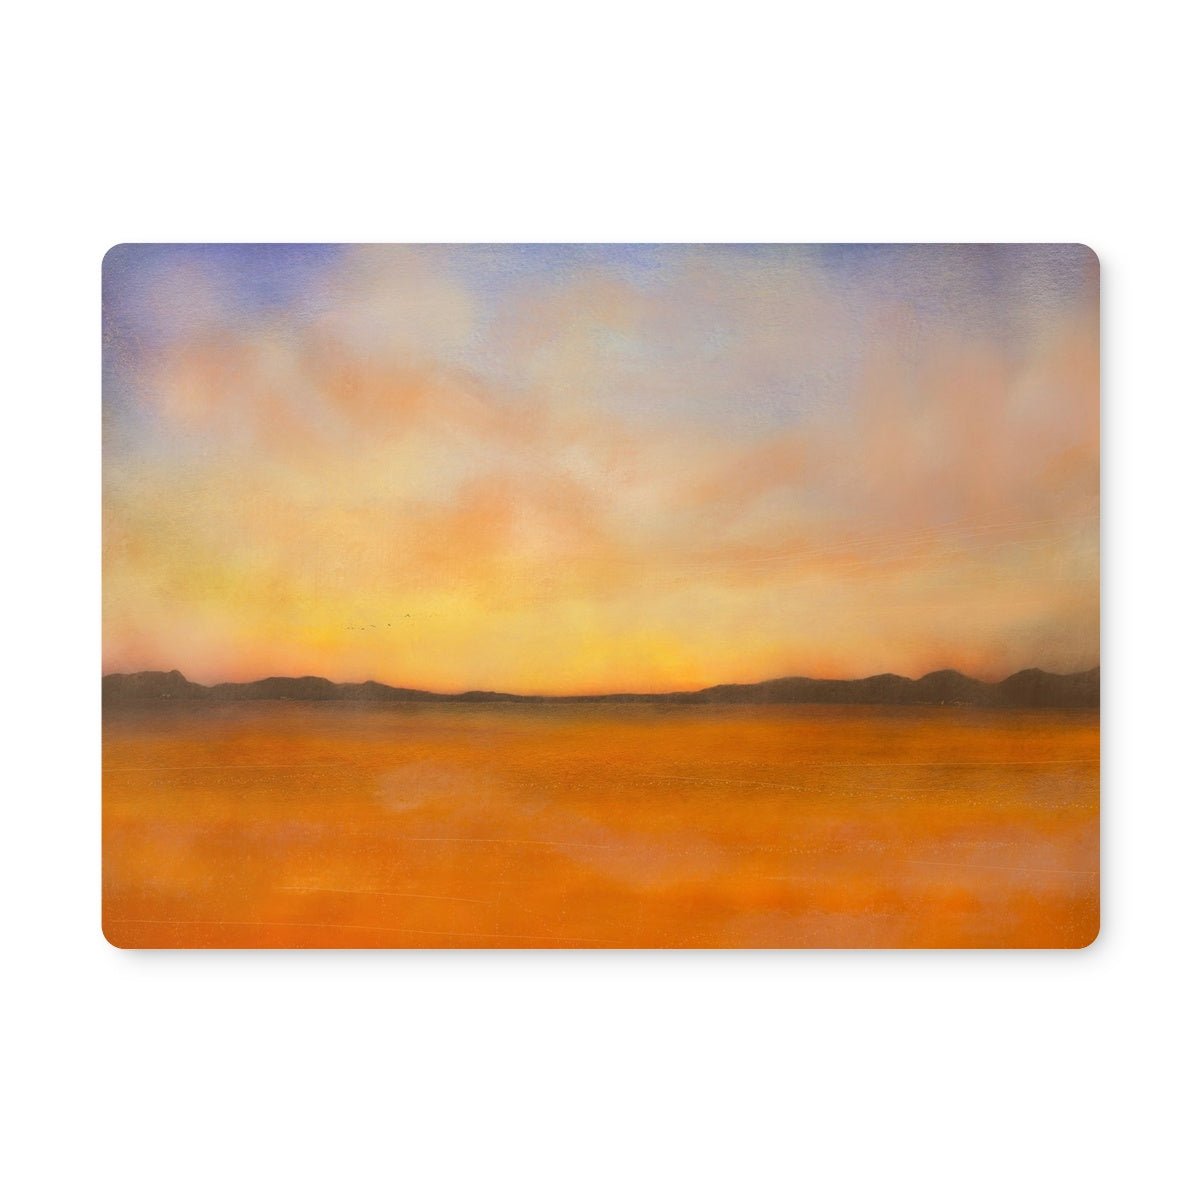 Islay Dawn Art Gifts Placemat-Placemats-Hebridean Islands Art Gallery-Single Placemat-Paintings, Prints, Homeware, Art Gifts From Scotland By Scottish Artist Kevin Hunter